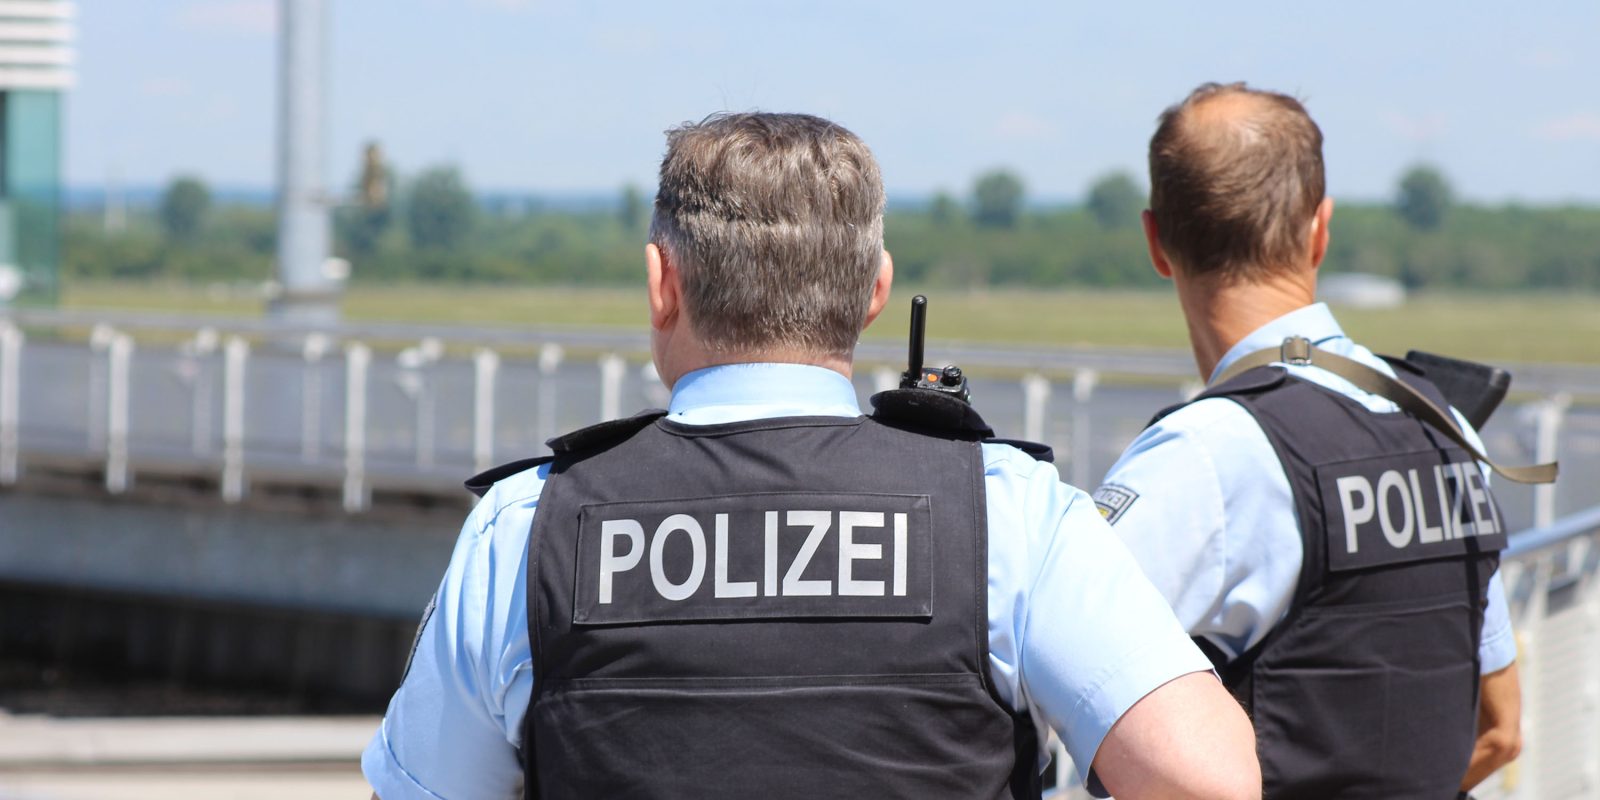 Contact tracing app data misused by German police